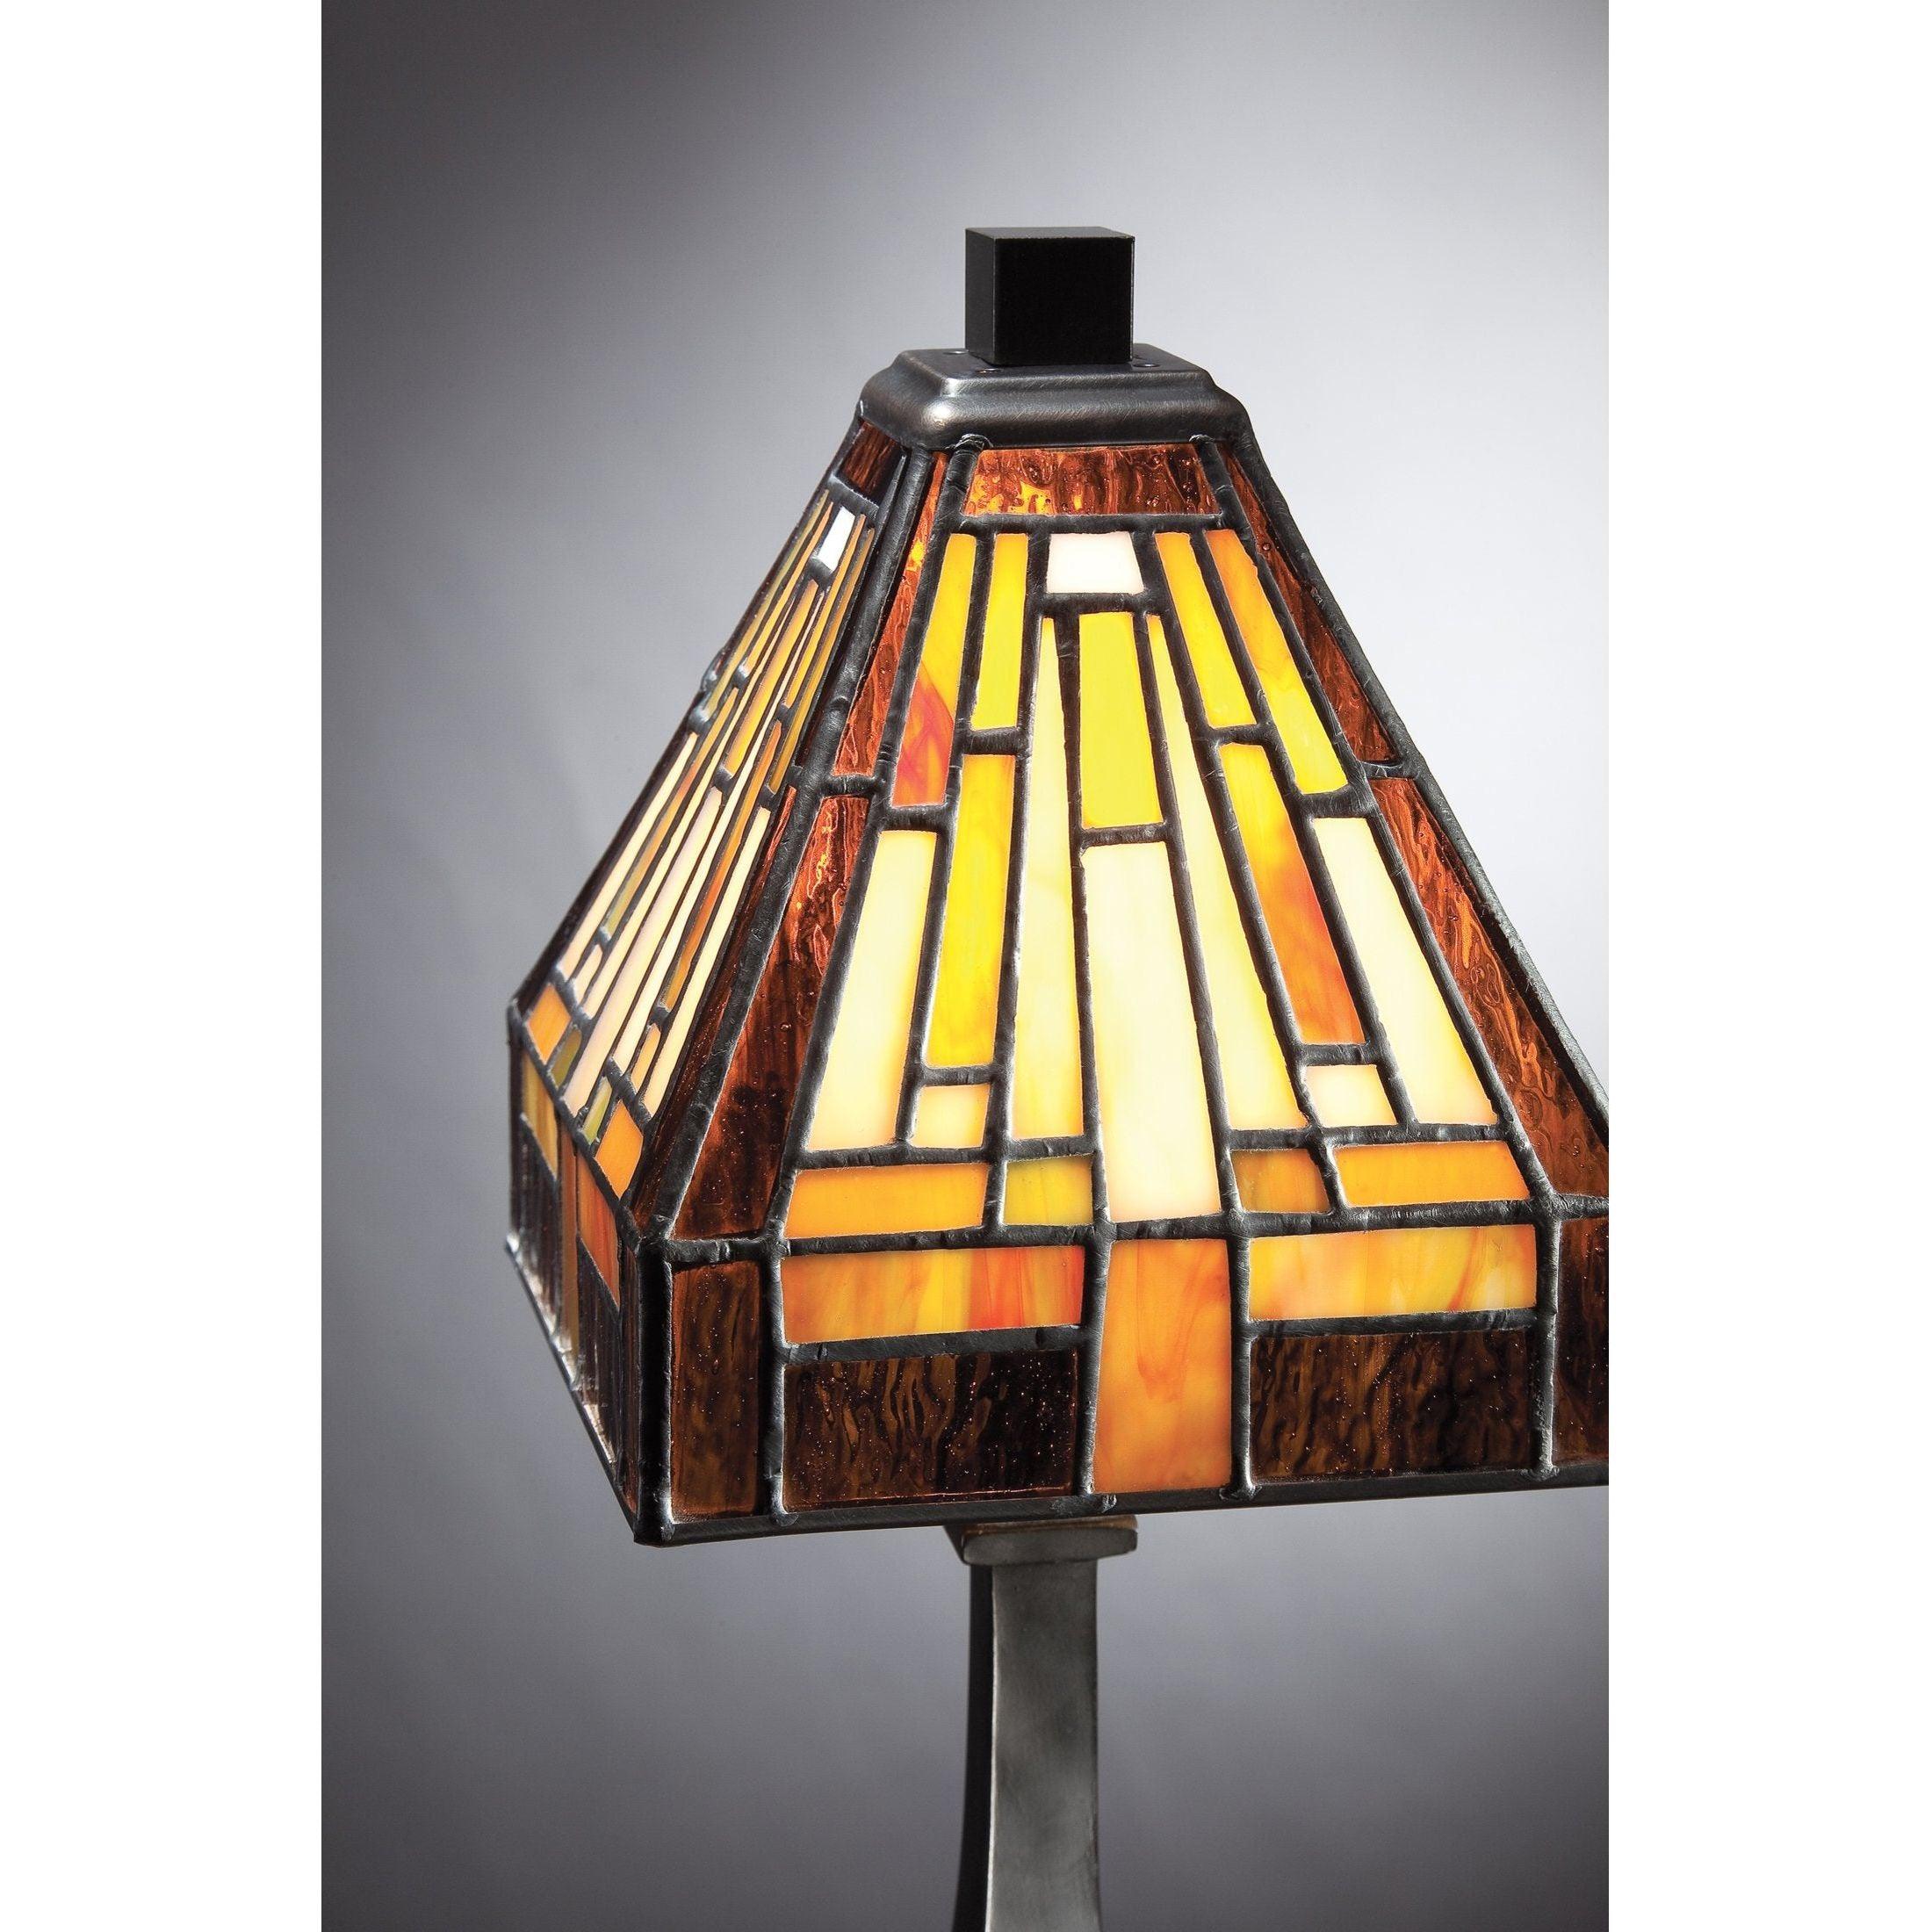 Quoizel - Stephen Table Lamp - Lights Canada